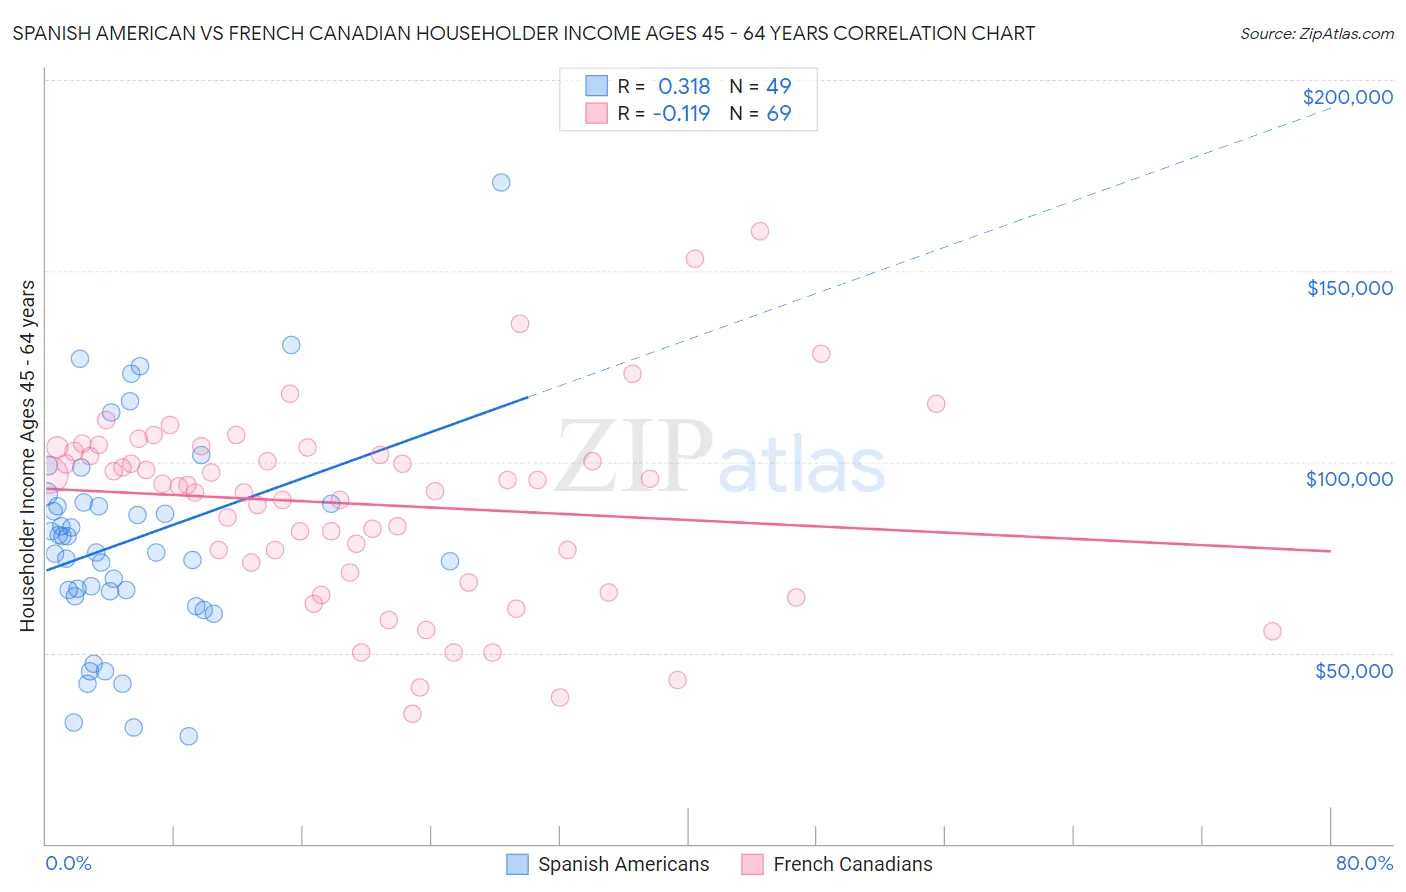 Spanish American vs French Canadian Householder Income Ages 45 - 64 years